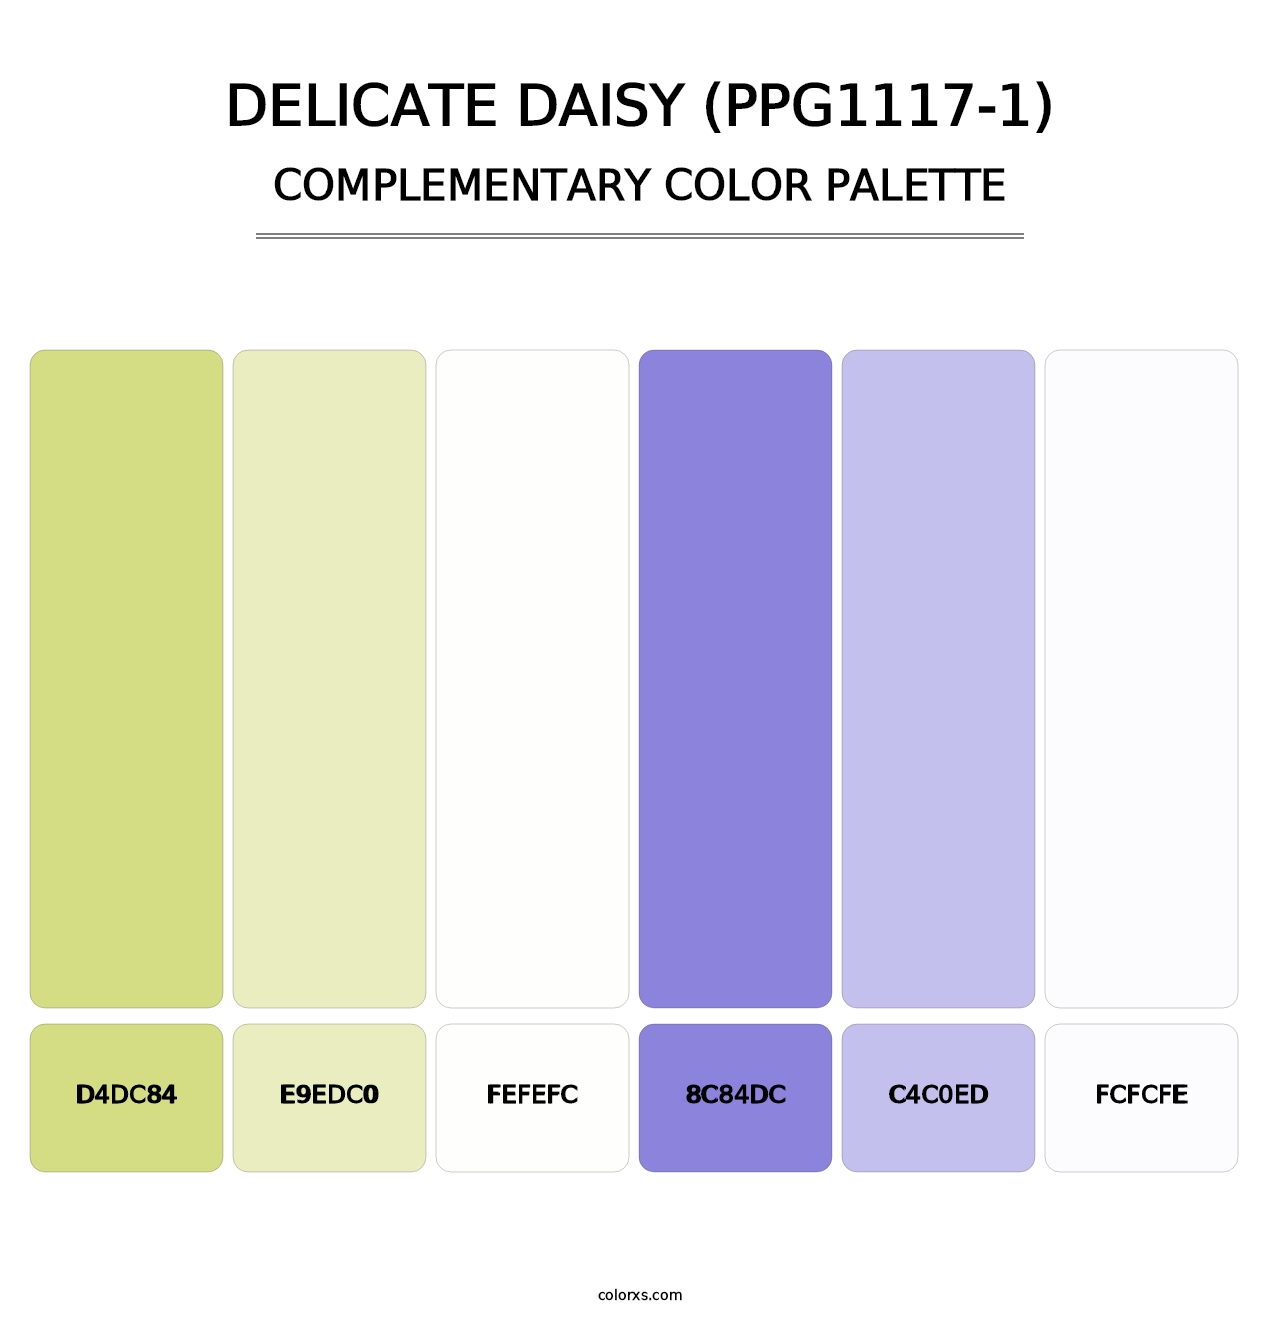 Delicate Daisy (PPG1117-1) - Complementary Color Palette